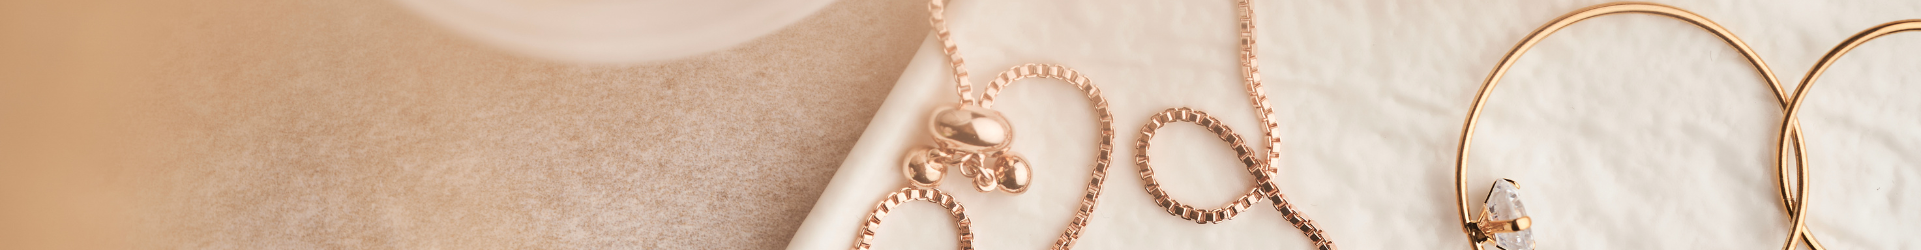 close up of rose gold chain